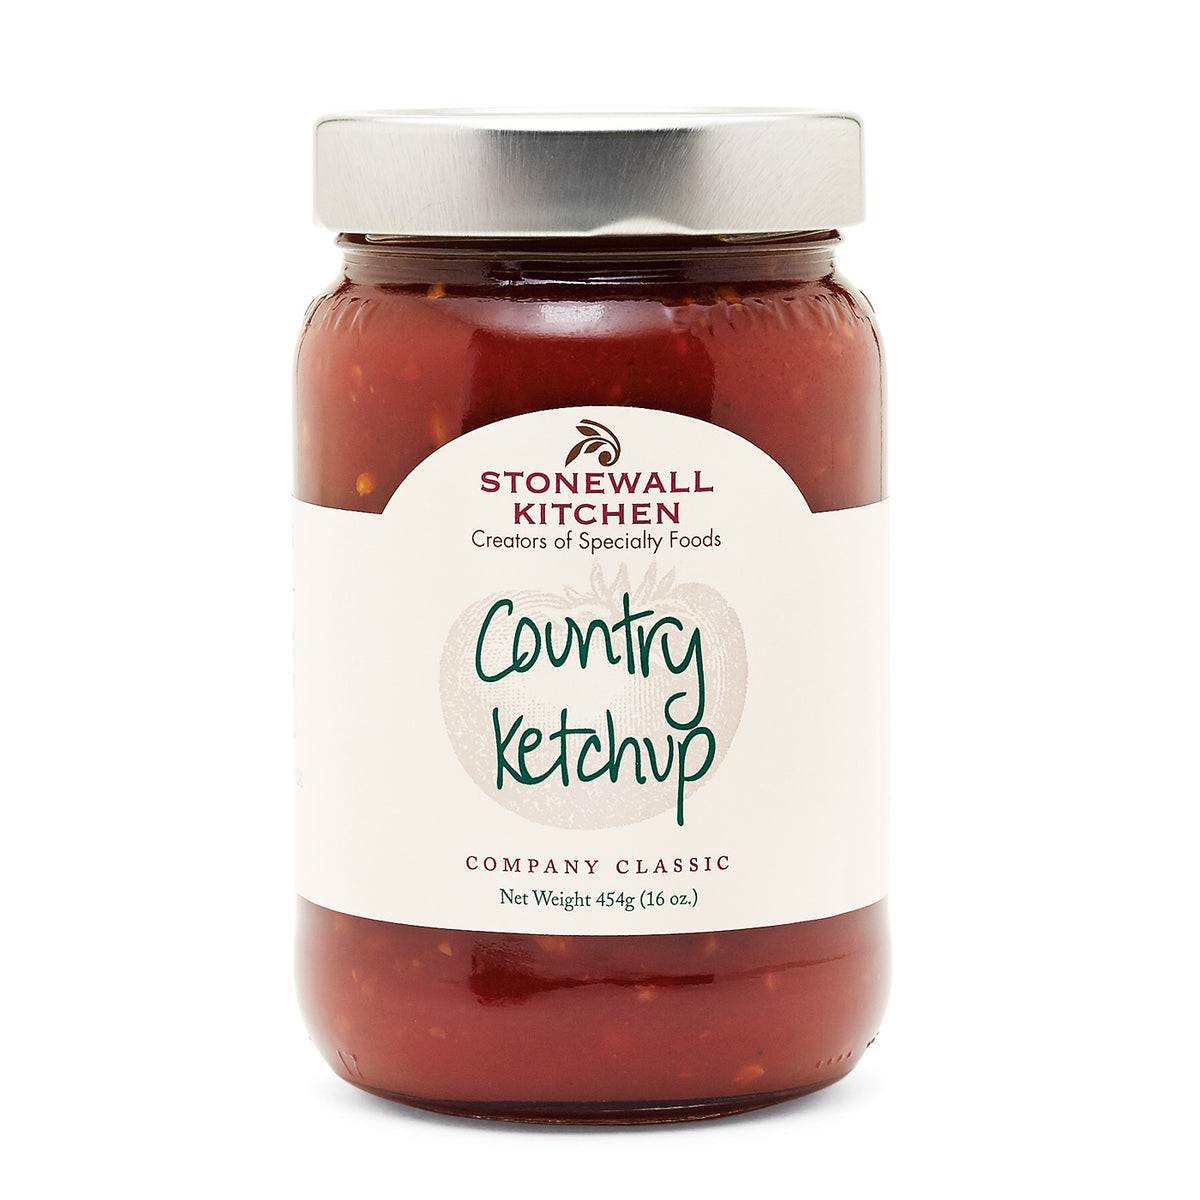 jar of Stonewall Kitchen Country Ketchup 16 oz. 454g made in Maine company classic